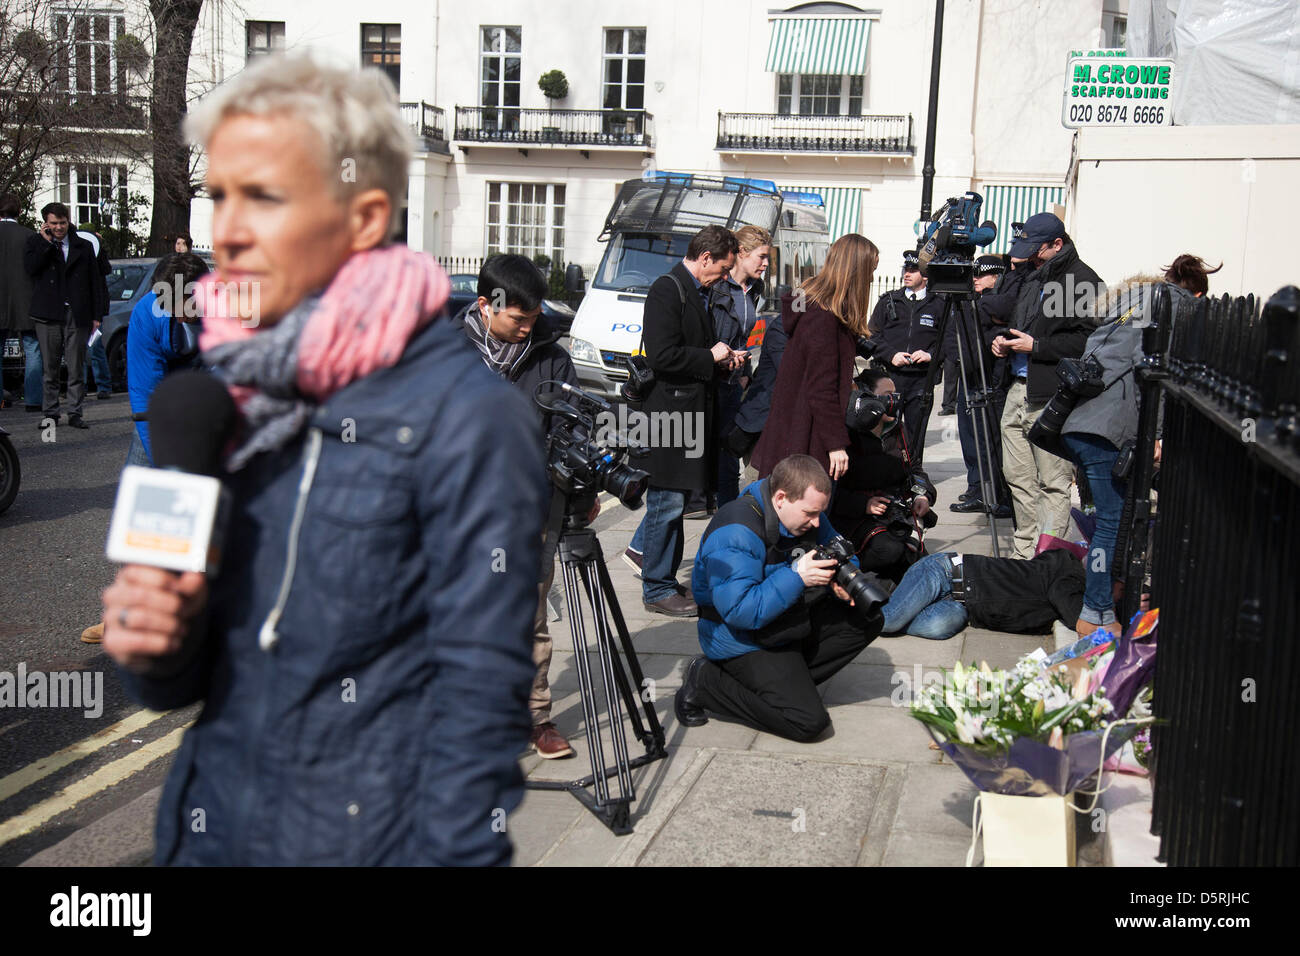 Media gather at the London residence on Chester Square of Baroness Margaret Thatcher following the announcement of her death. Maggie Thatcher (87), aka the 'Iron Lady' dominated British politics for 20 years. Stock Photo